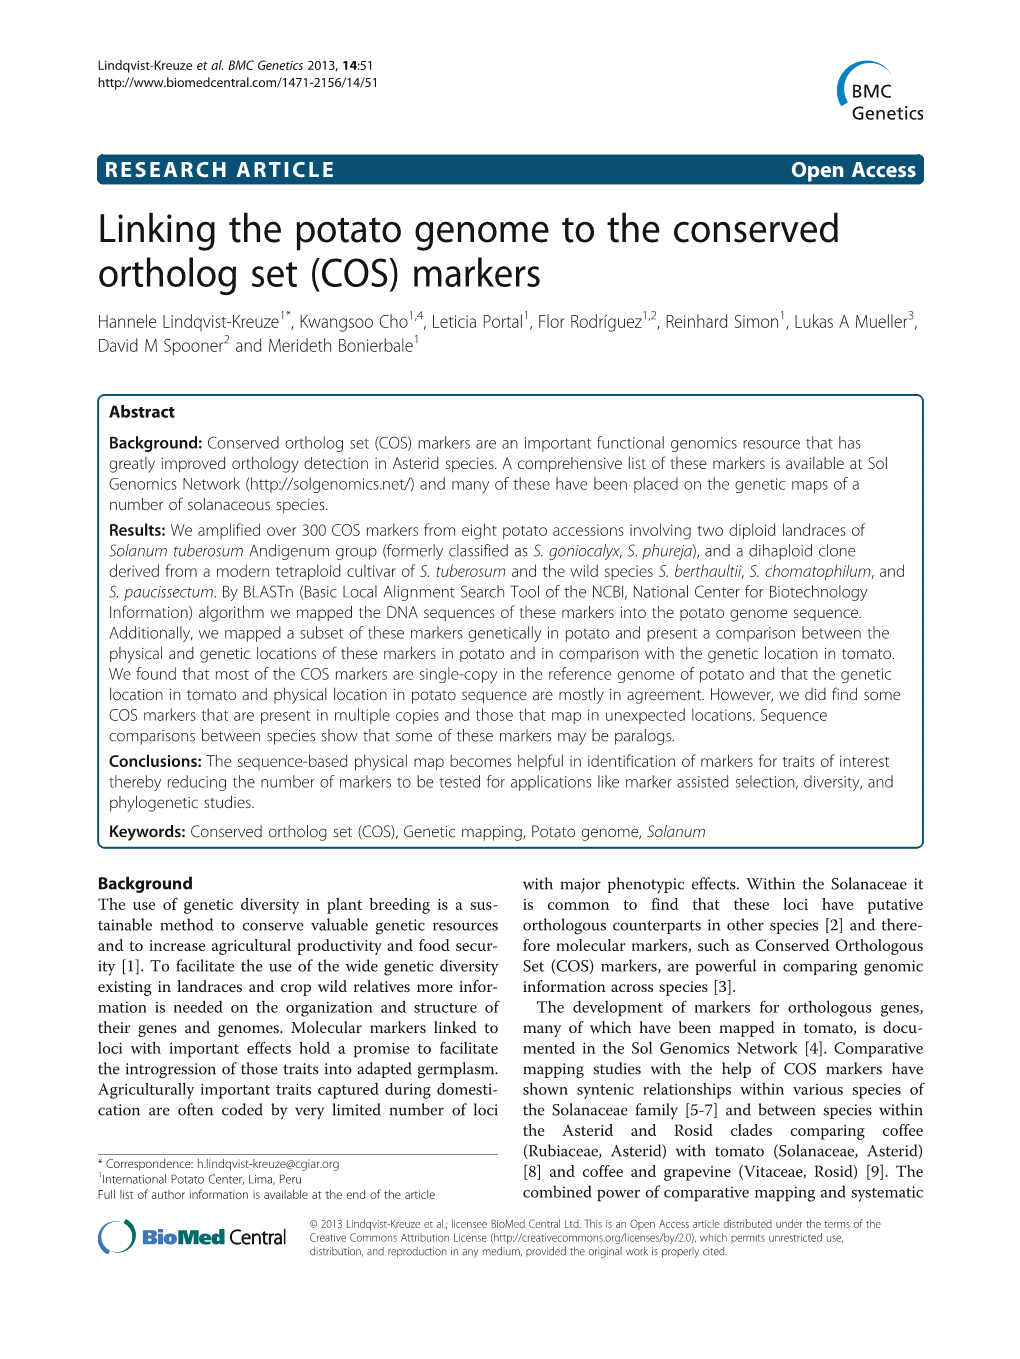 Linking the Potato Genome to the Conserved Ortholog